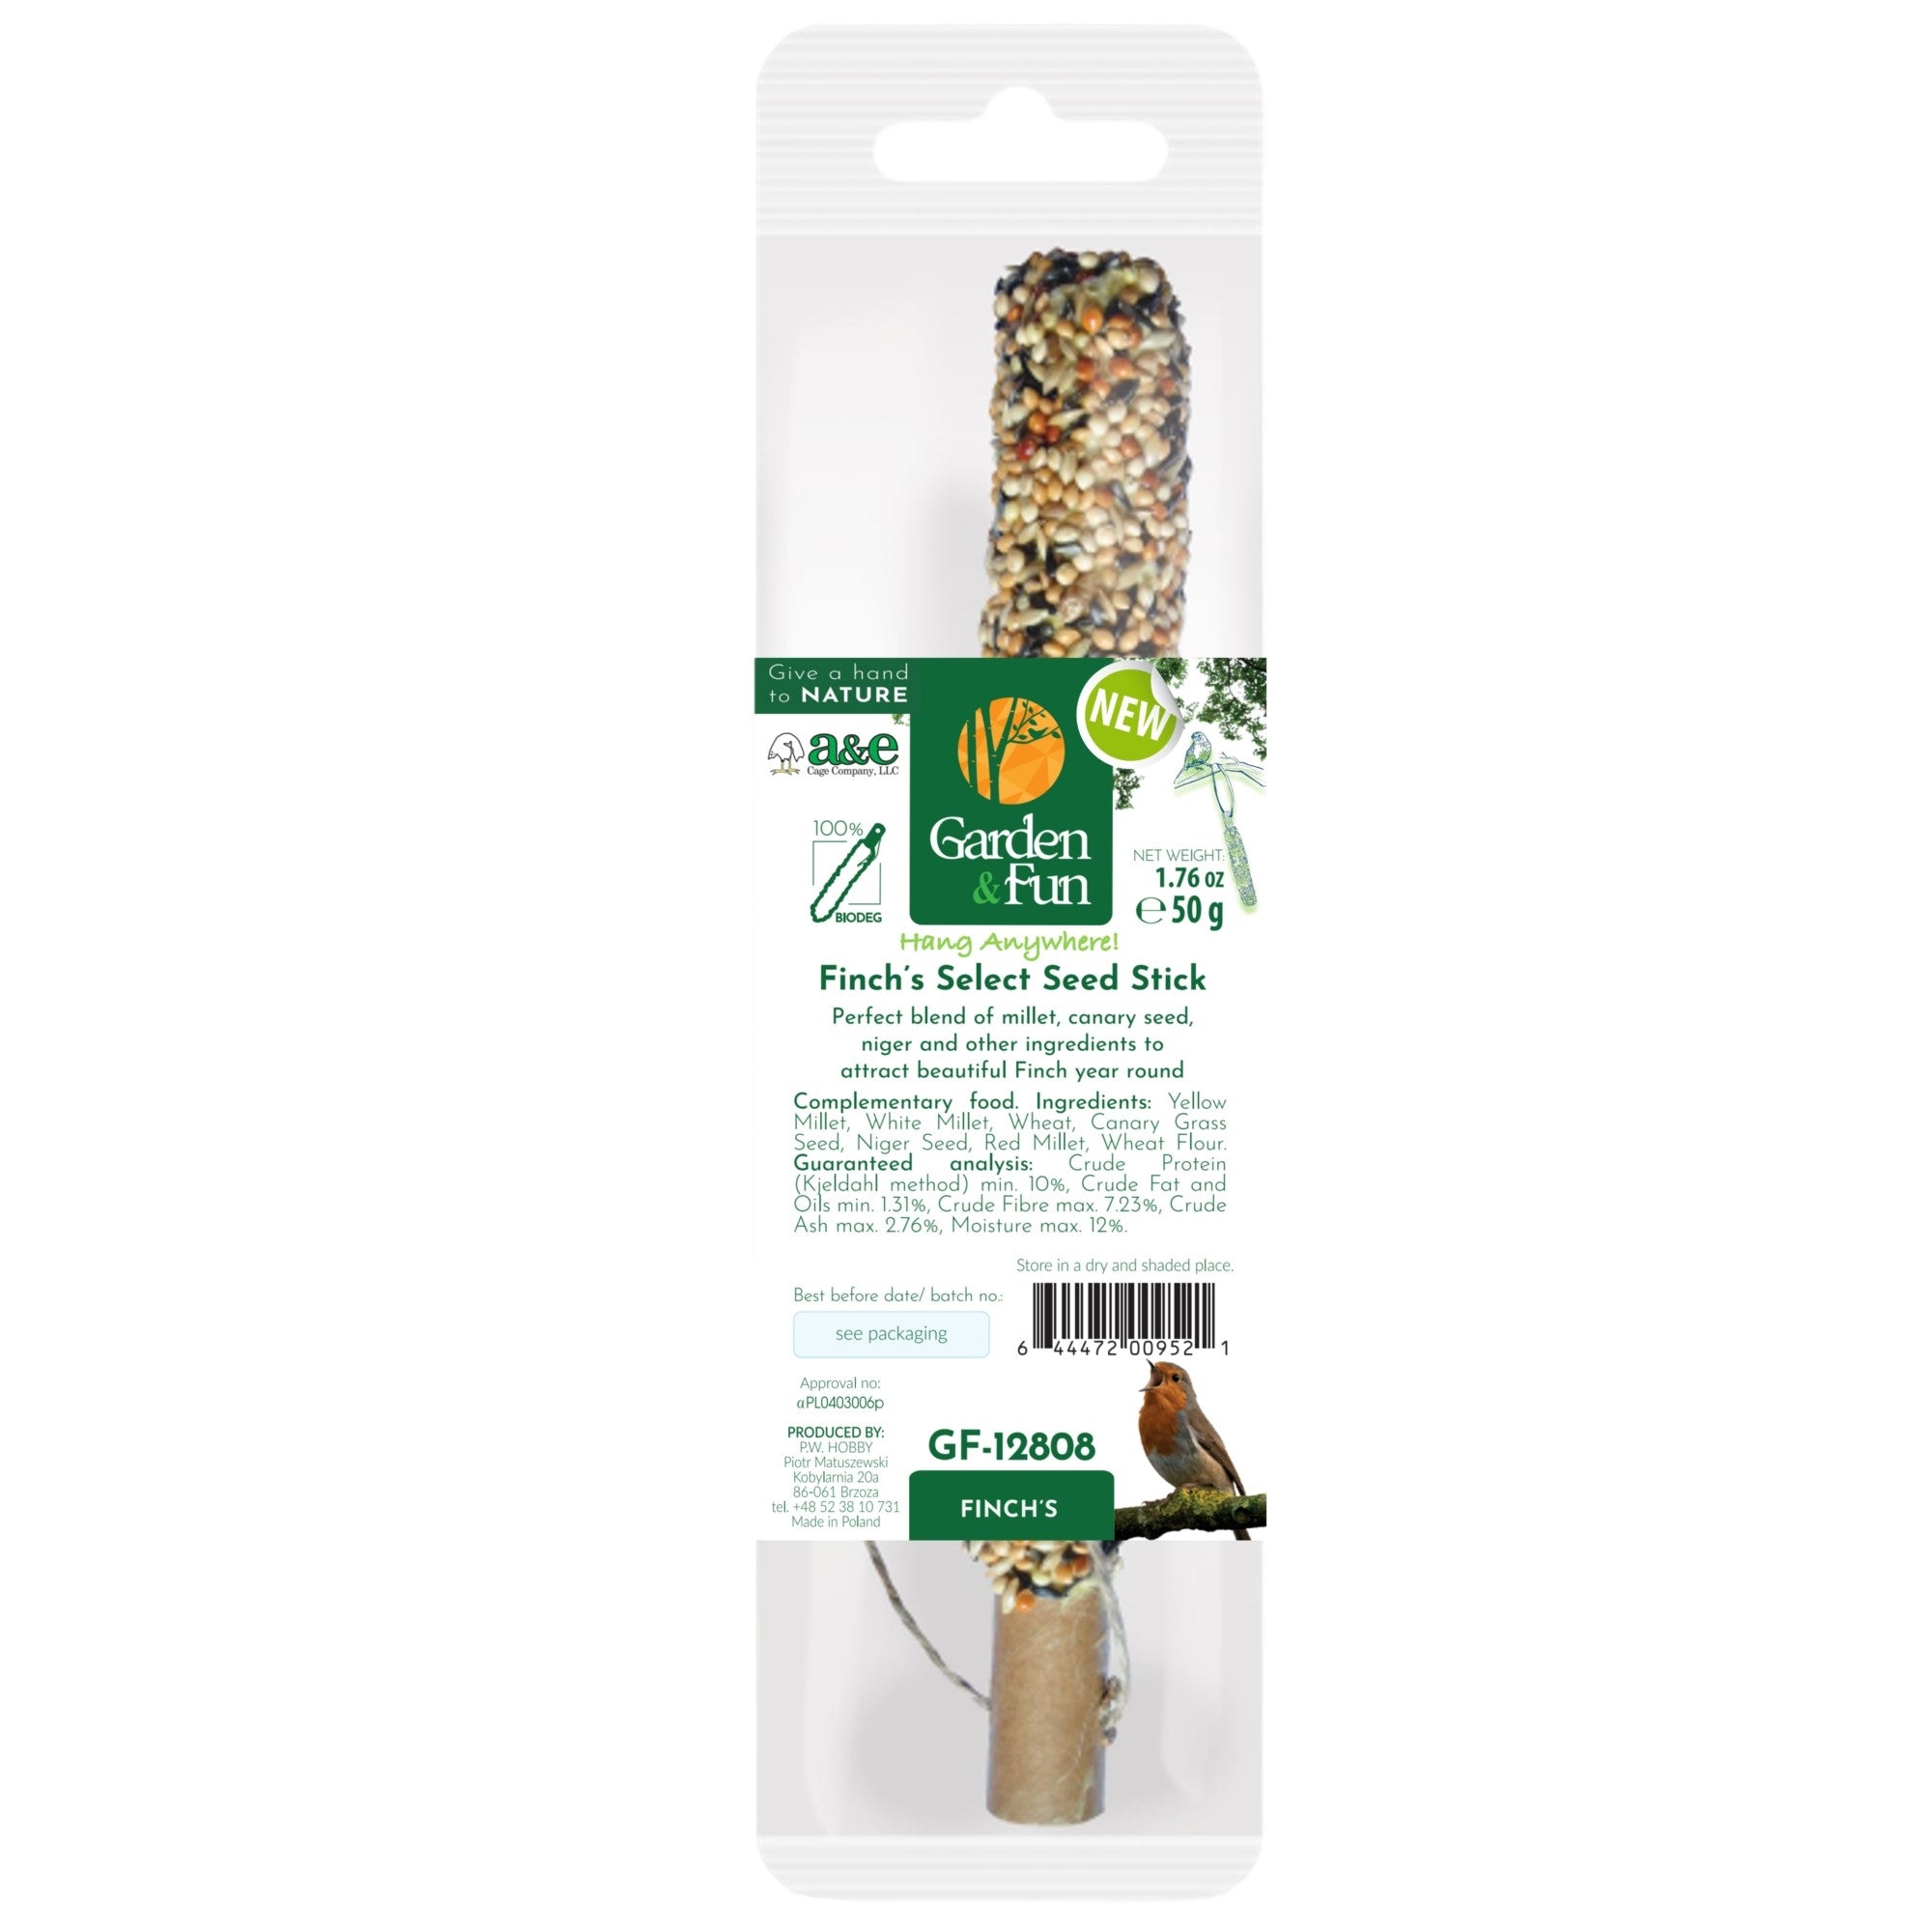 A & E Cage Smakers Wild Bird Seed Stick for Finches, 1.76oz